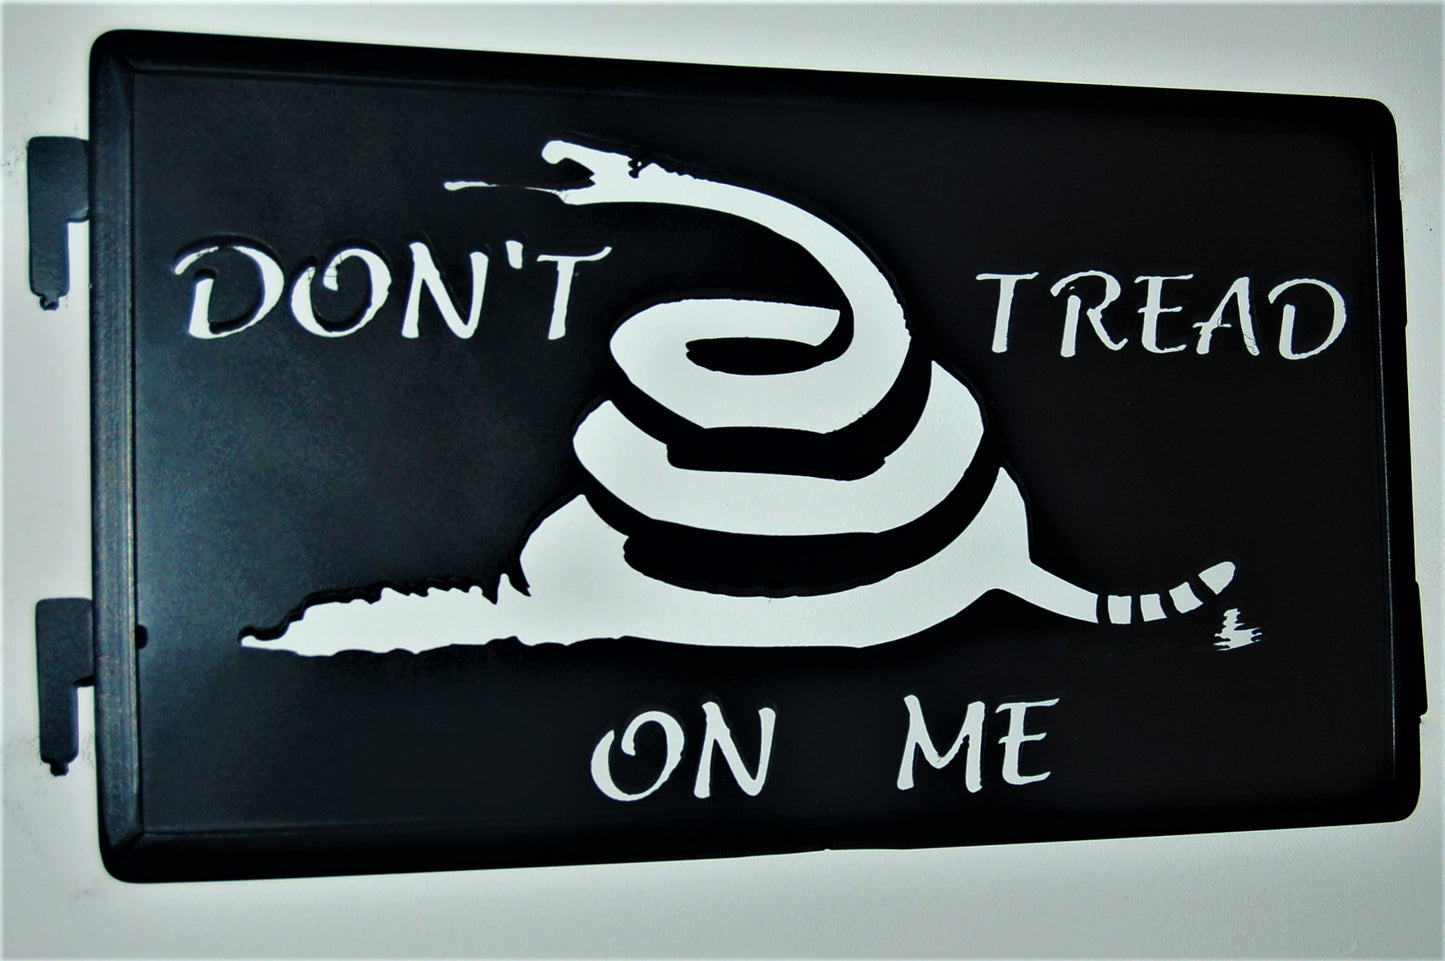 Black metal Don't tread on me inspiring panel with snake coiled in the center 